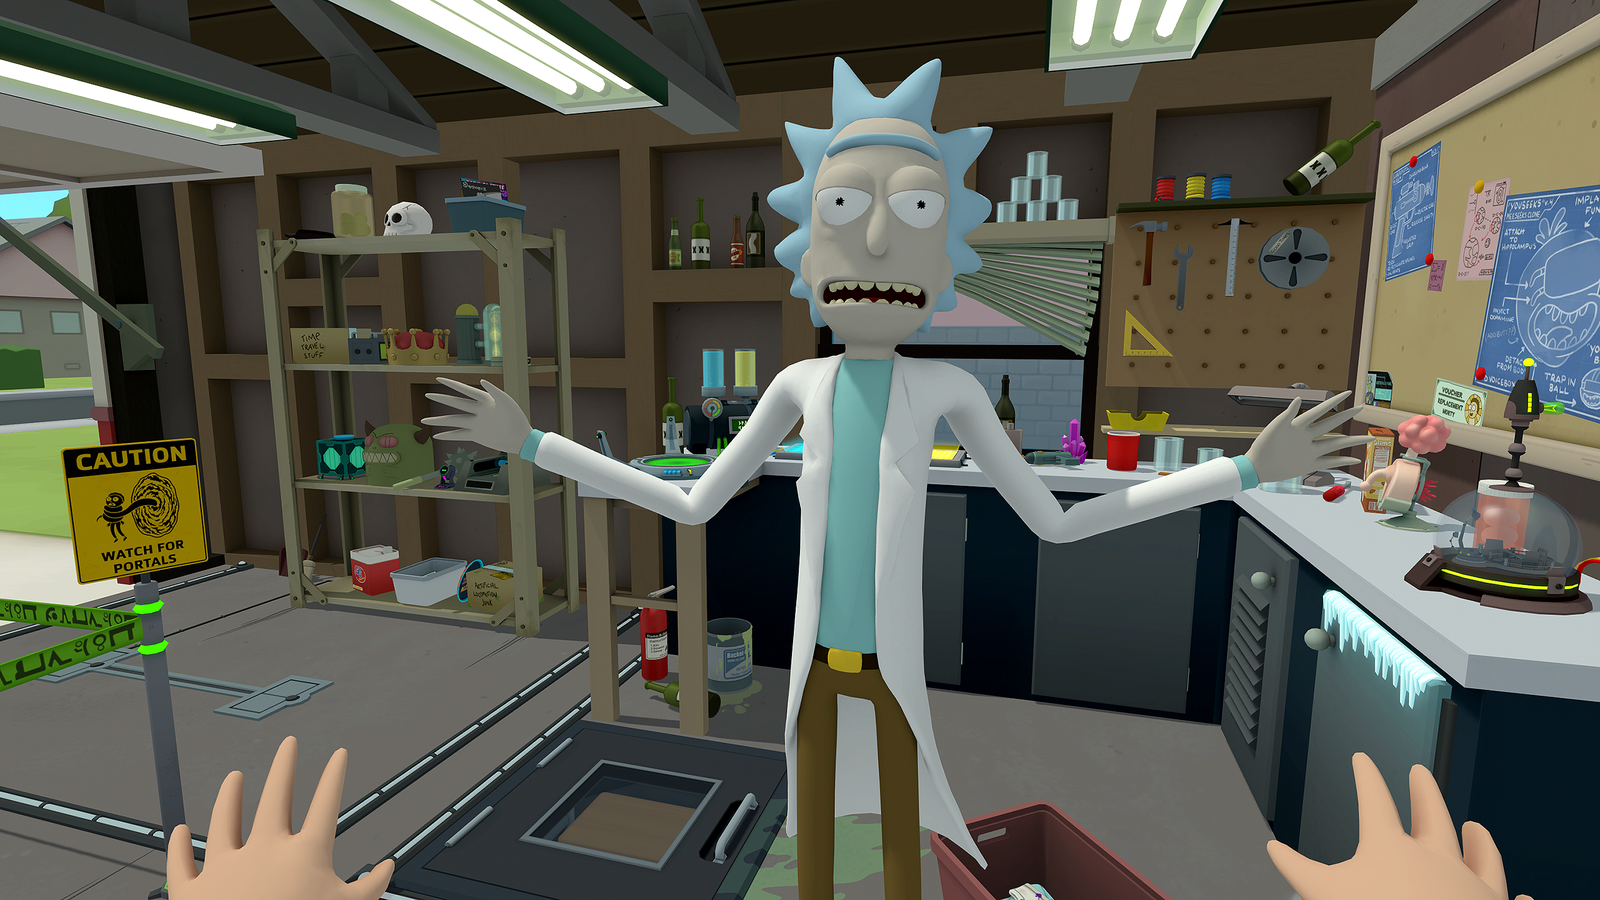 Rick and Morty in VR is just as weird and smart as the show